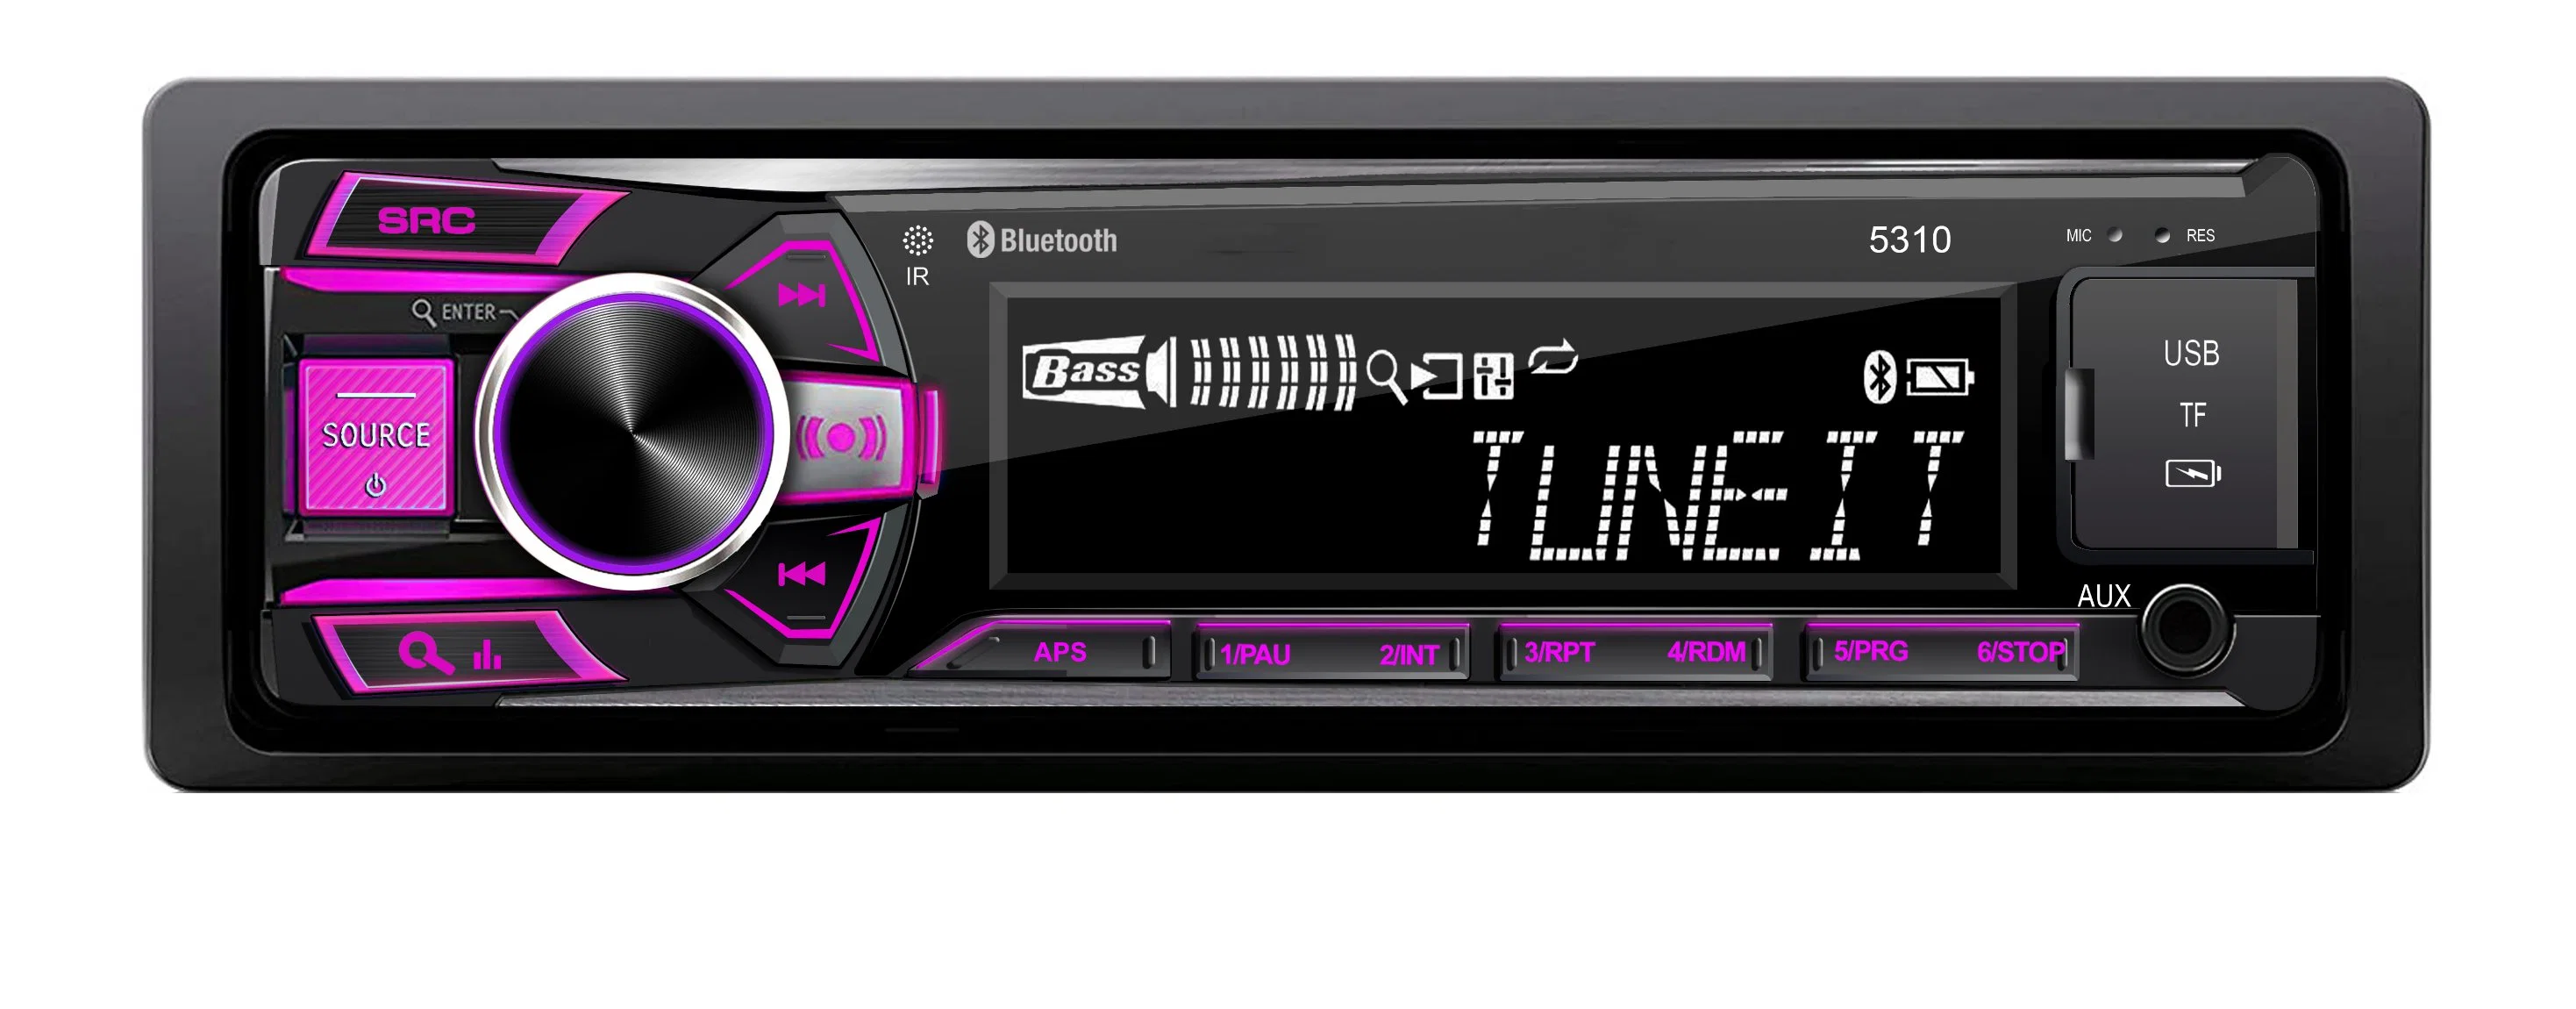 DAB RDS LCD Single DIN Car Stereo Receiver Push to Talk Assistant Bluetooth Hands Free Calling & Music Streaming Am/FM Radio USB Playback & Charging